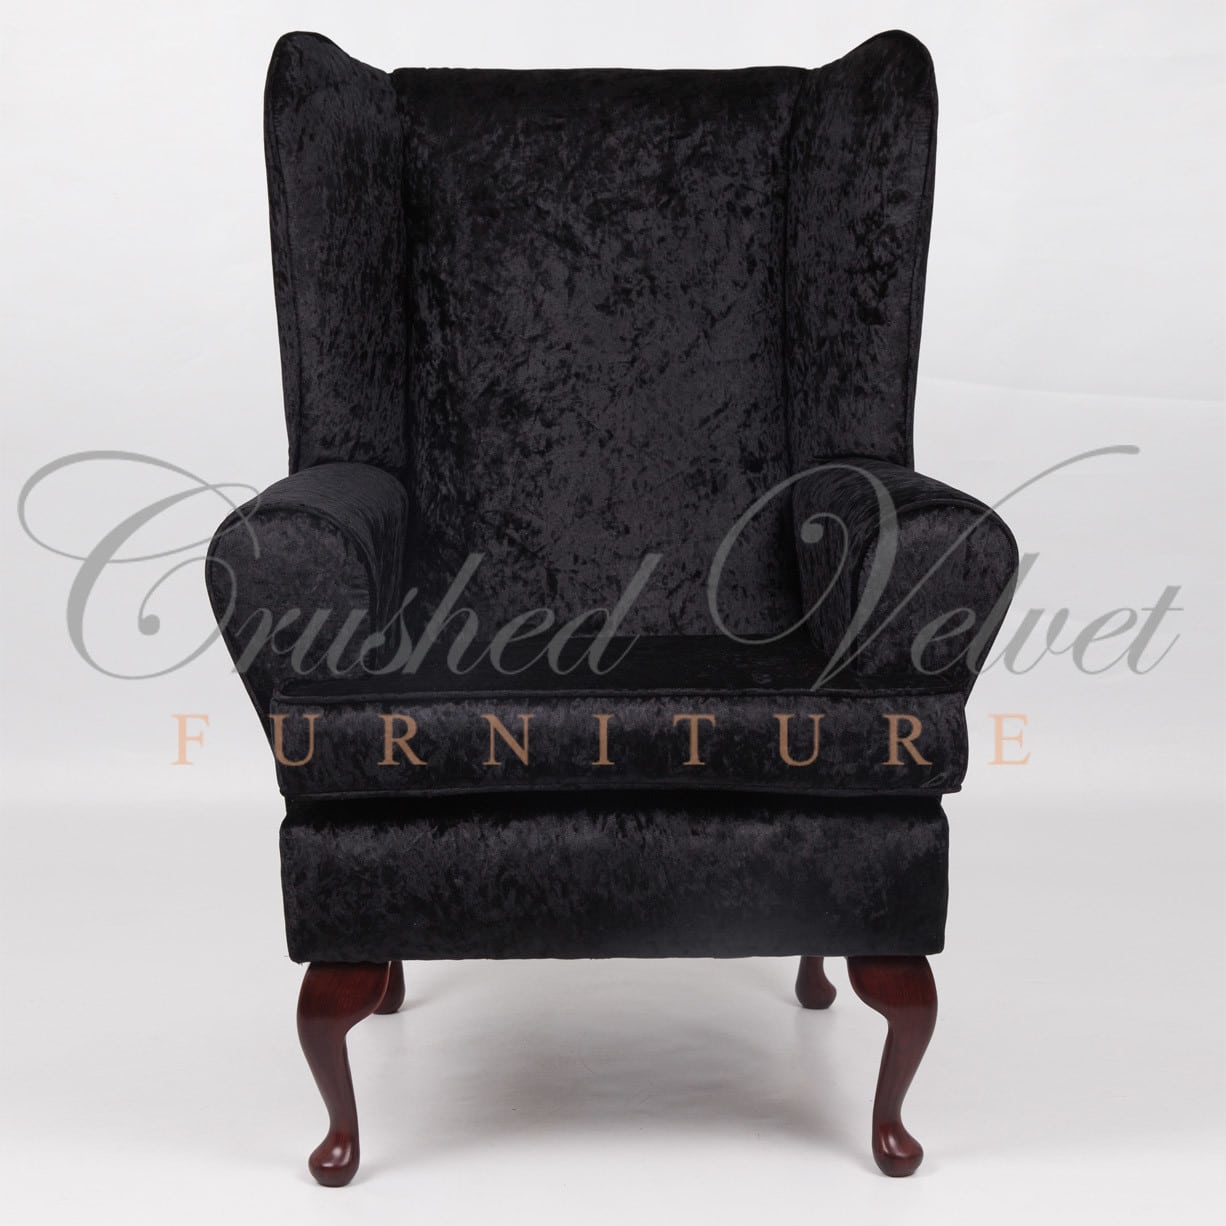 Crushed Velvet Furniture Sofas, Beds, Chairs, Cushions